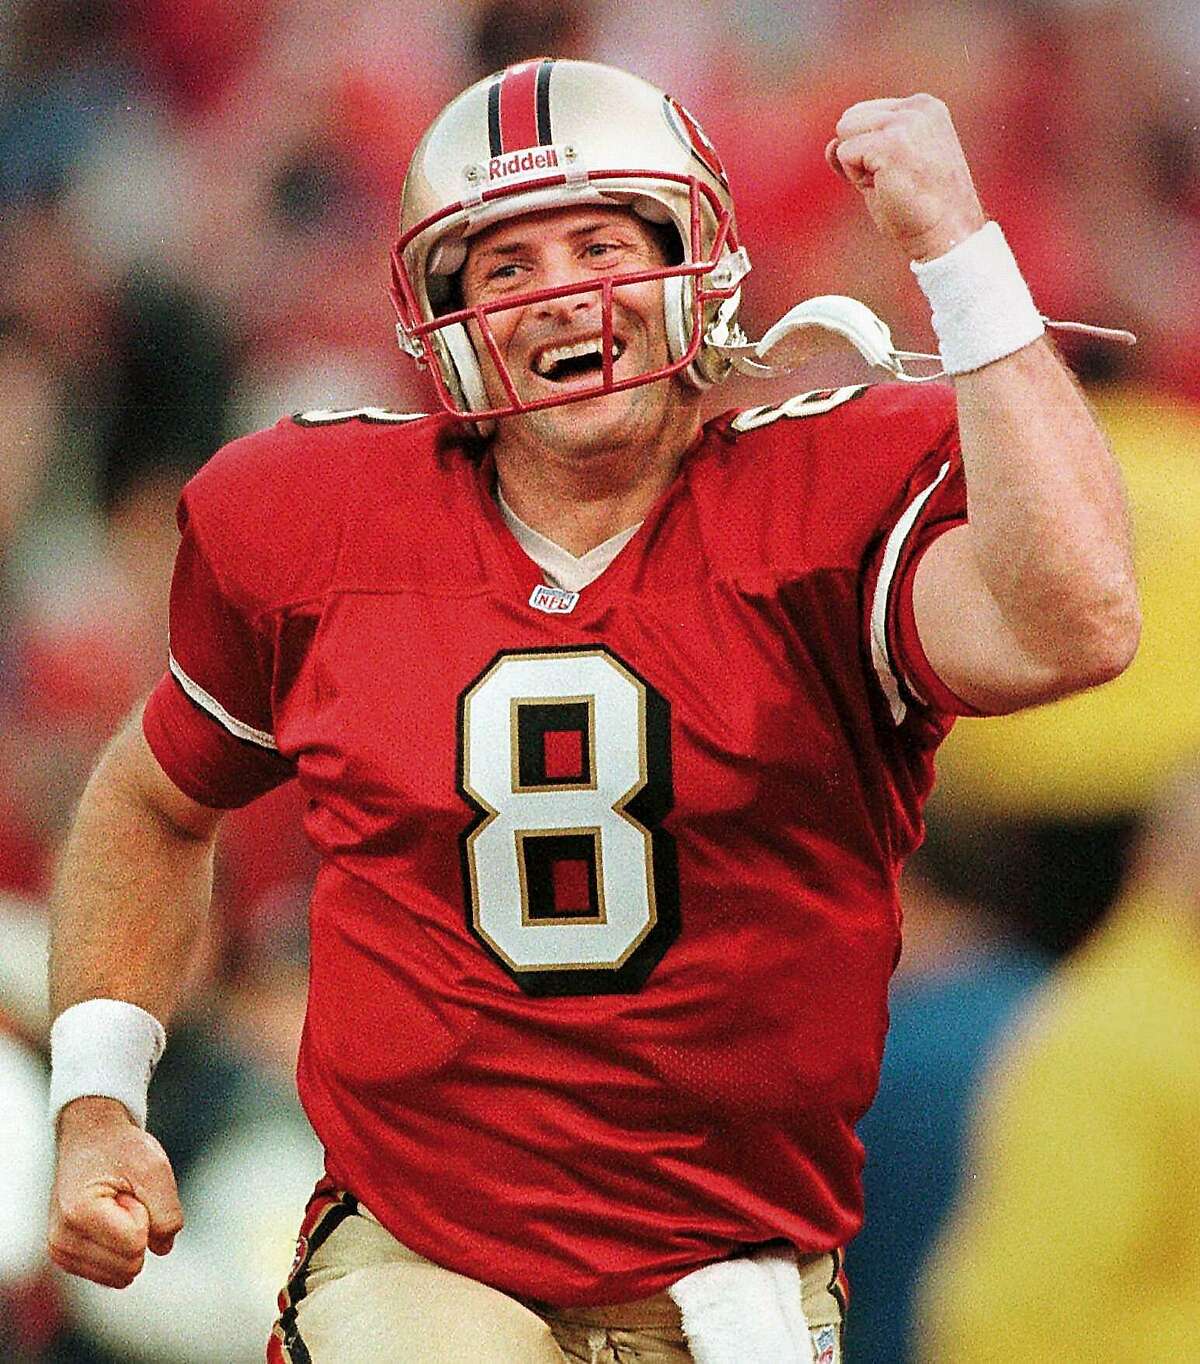 FILE -- San Francisco 49ers quarterback Steve Young reacts after throwing the game-winning pass to Terrell Owens during the fourth quarter of their game against the Green Bay Packers at 3Comm Park in San Francisco, Calif., in this Jan. 3, 1999 photo. The 38-year-old quarterback, who played with grit and heart during a 15-year career, announced his retirement Monday, June 12, 2000, in the same room where he spent his days preparing his battered body for one big game after another. (AP Photo/Milwaukee Journal Sentinel, Tom Lynn)